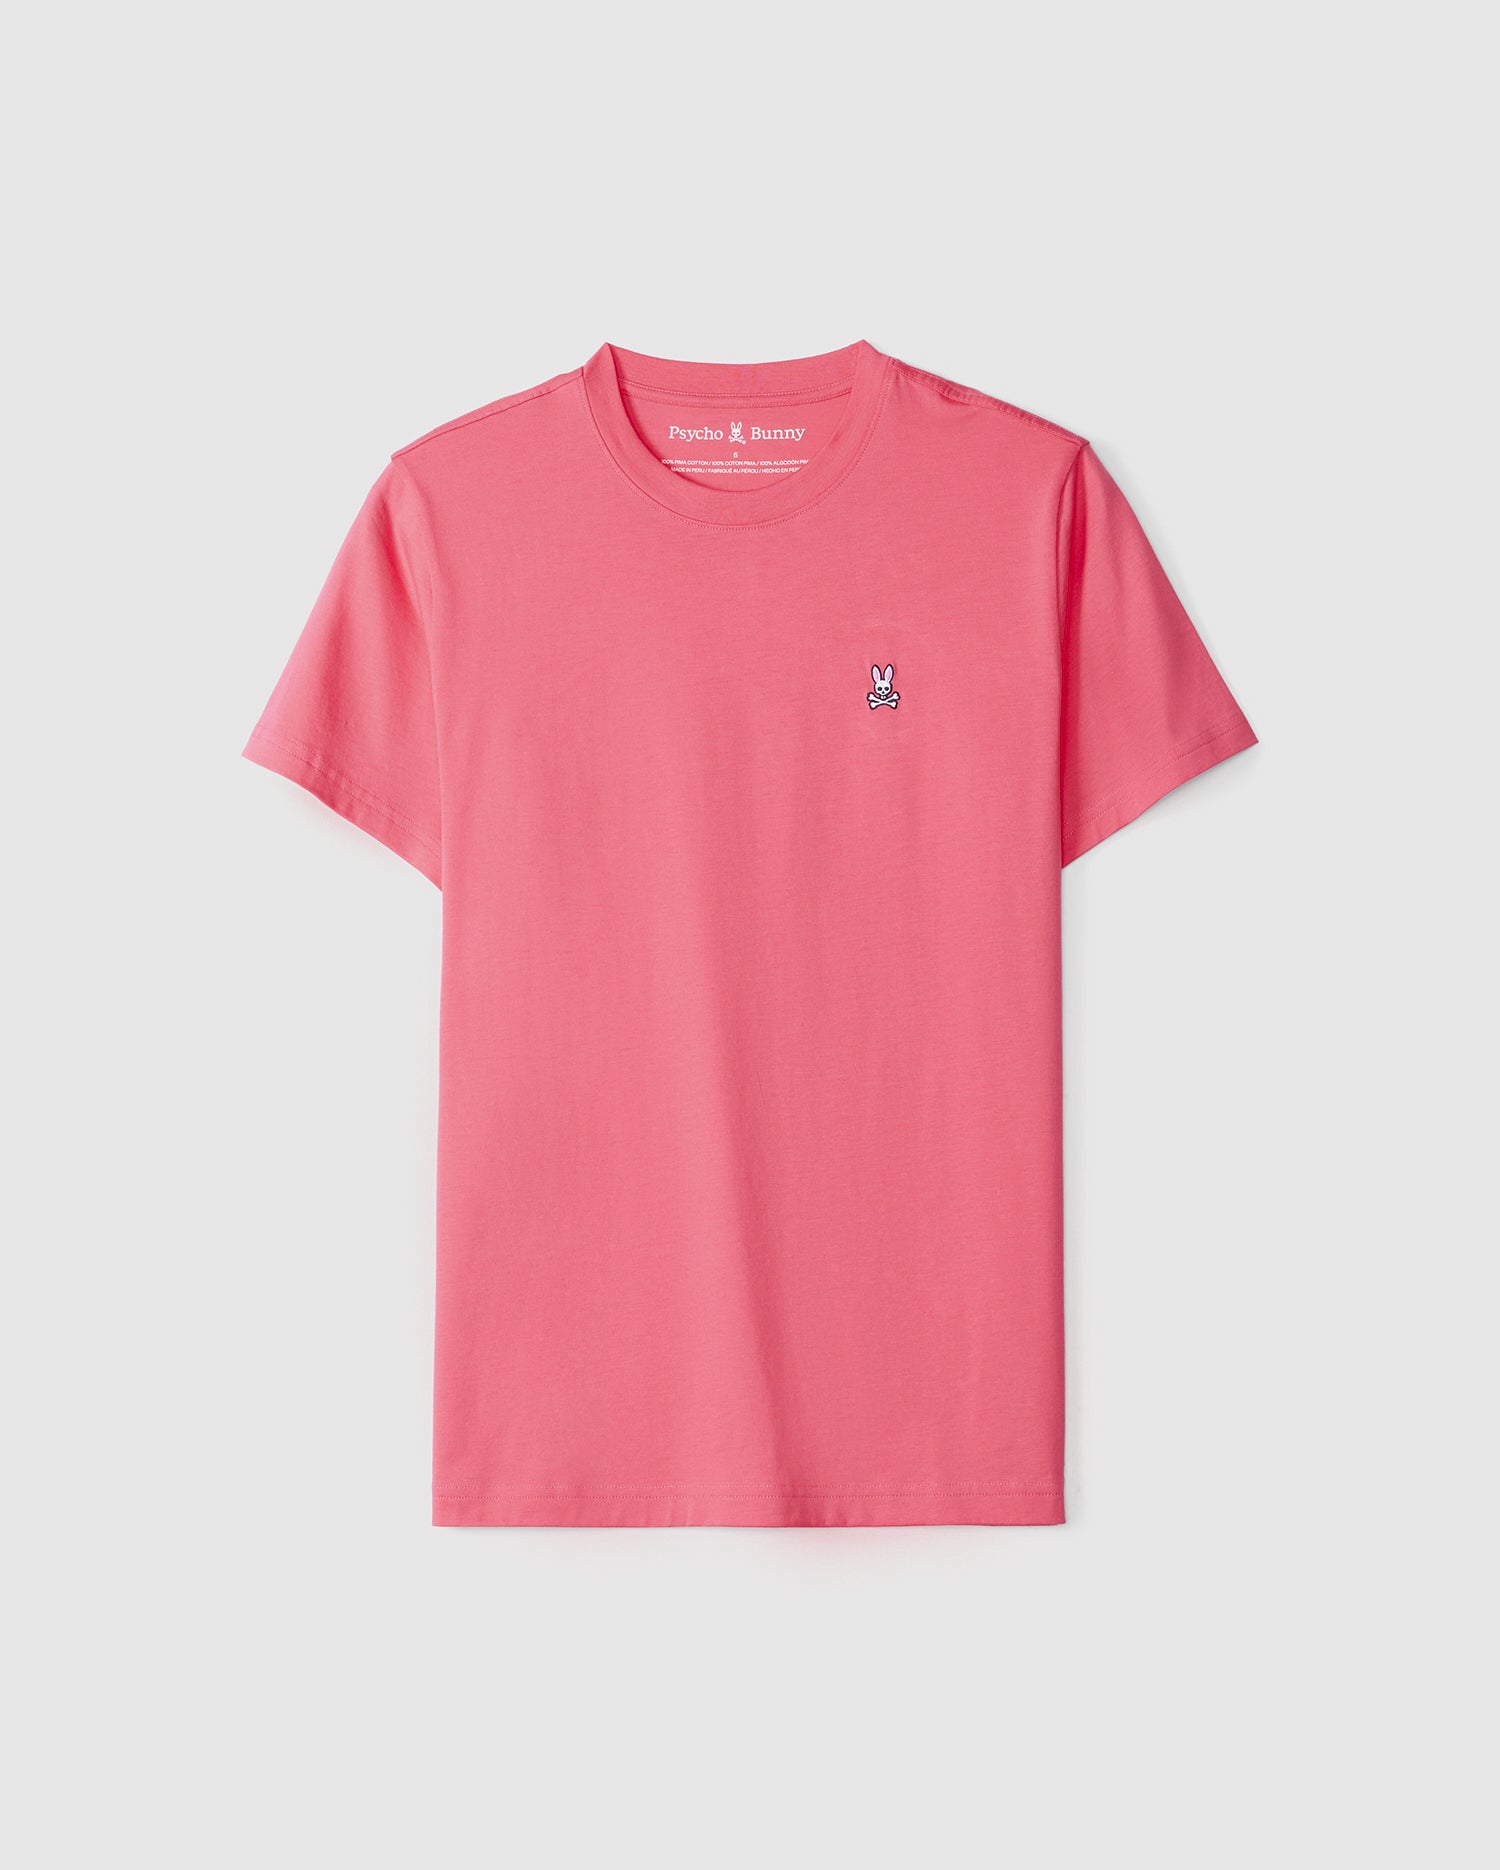 Men's classic crew neck tee displayed on a plain background, featuring a small embroidered bunny logo on the left chest area.